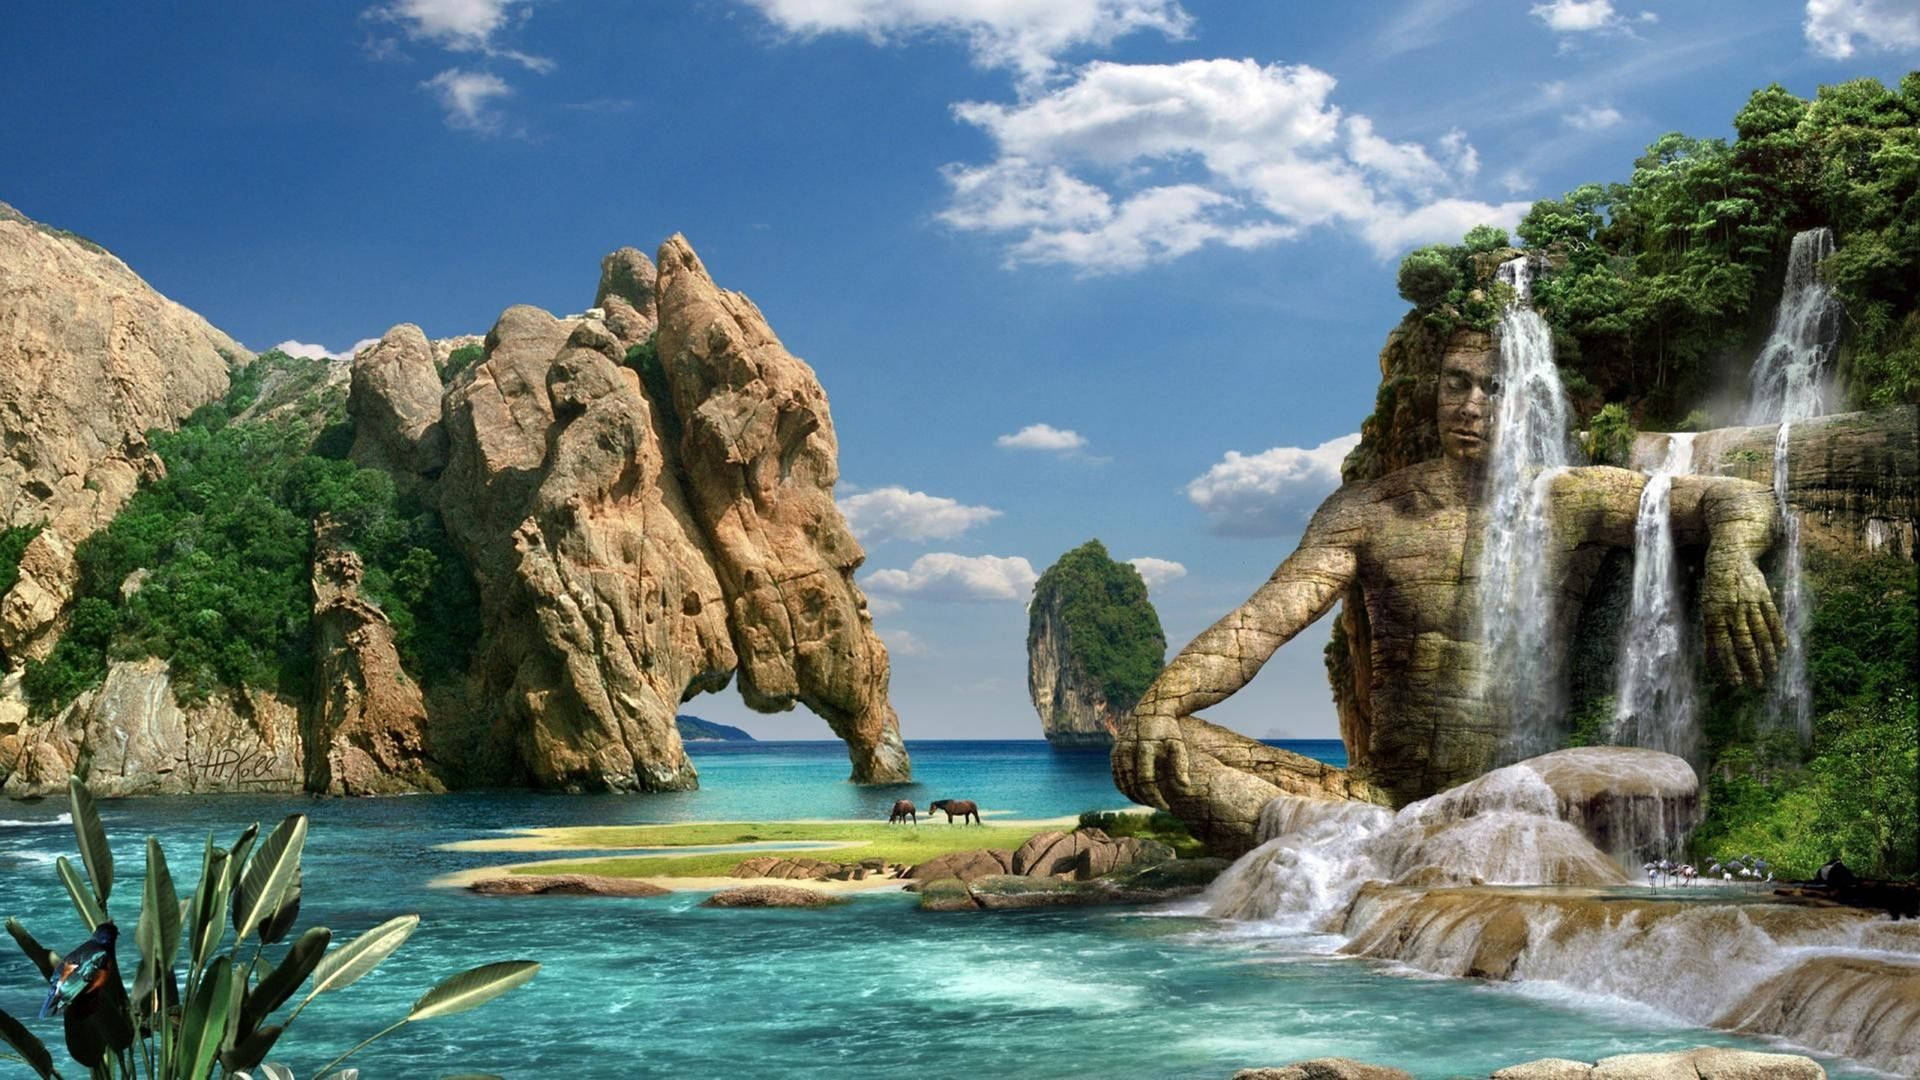 Elephant Rock And The Man Hd Waterfall Wallpaper